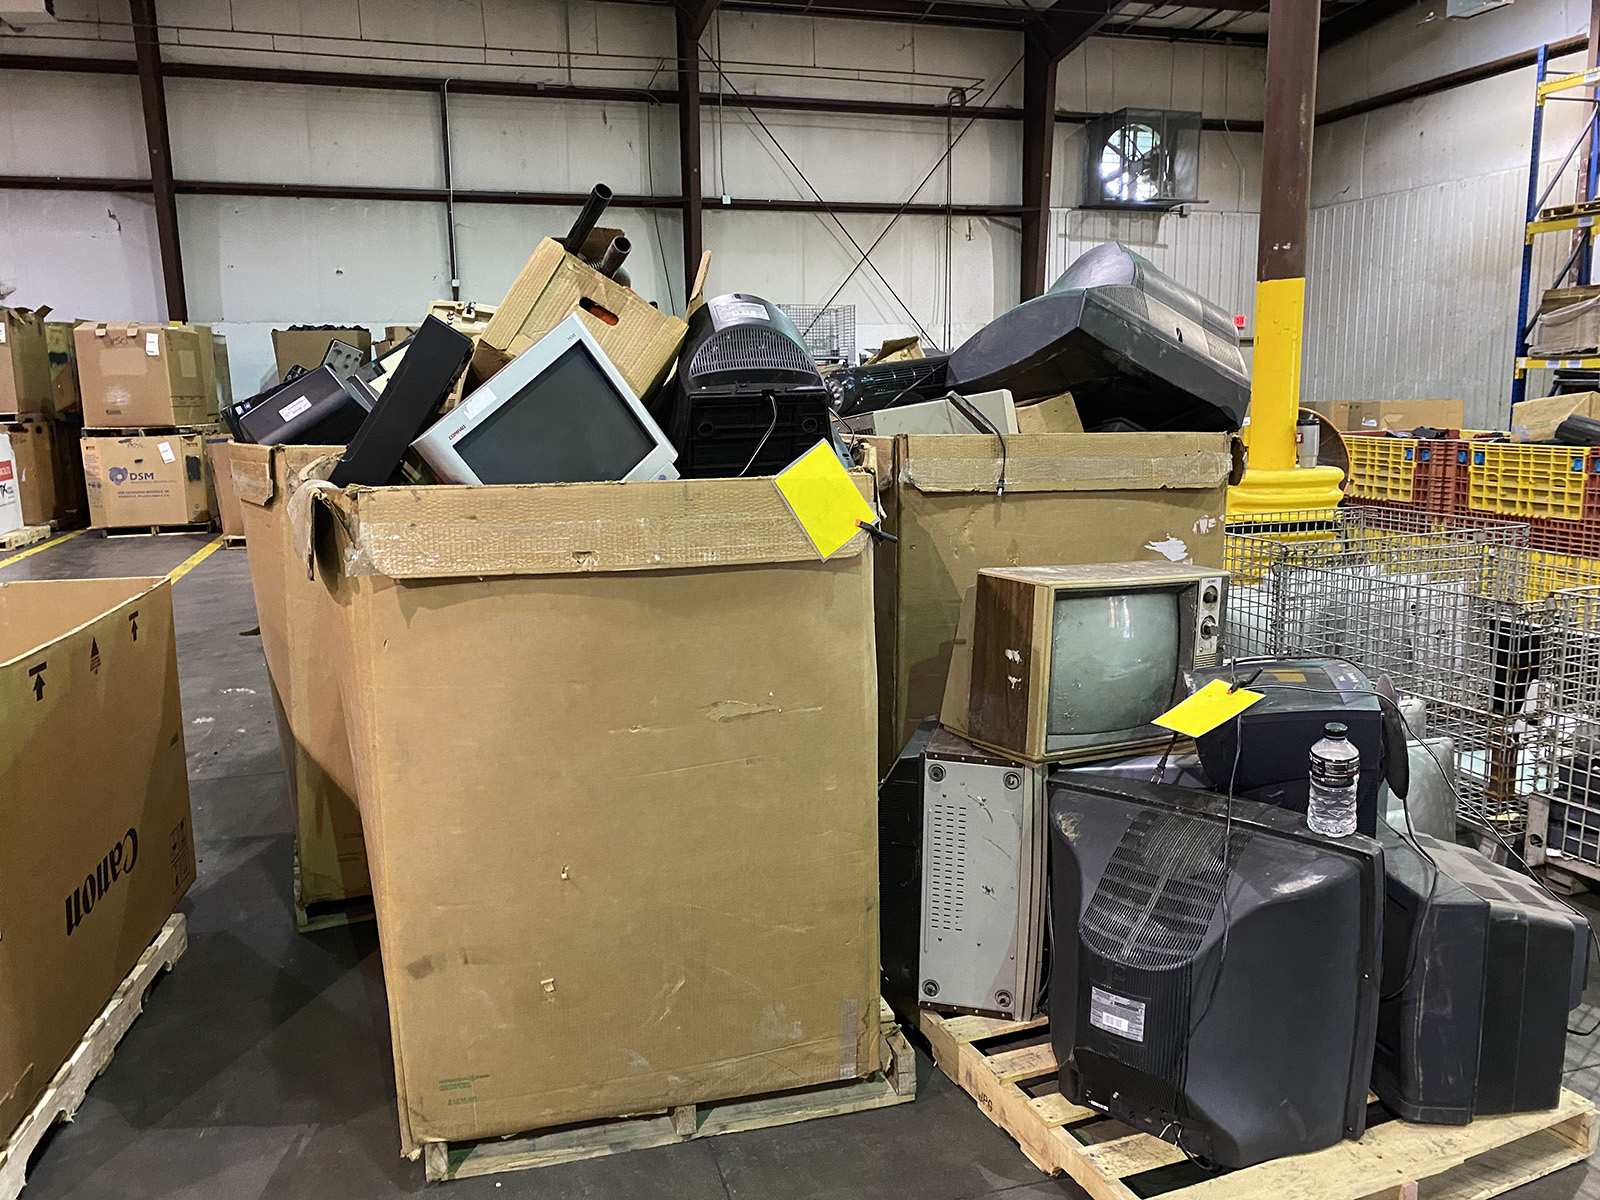 E-waste comes in many forms, from old TVs and monitors to desktop and laptop computers, videocassette recorders, cables, connectors and telephones, to name a few. 